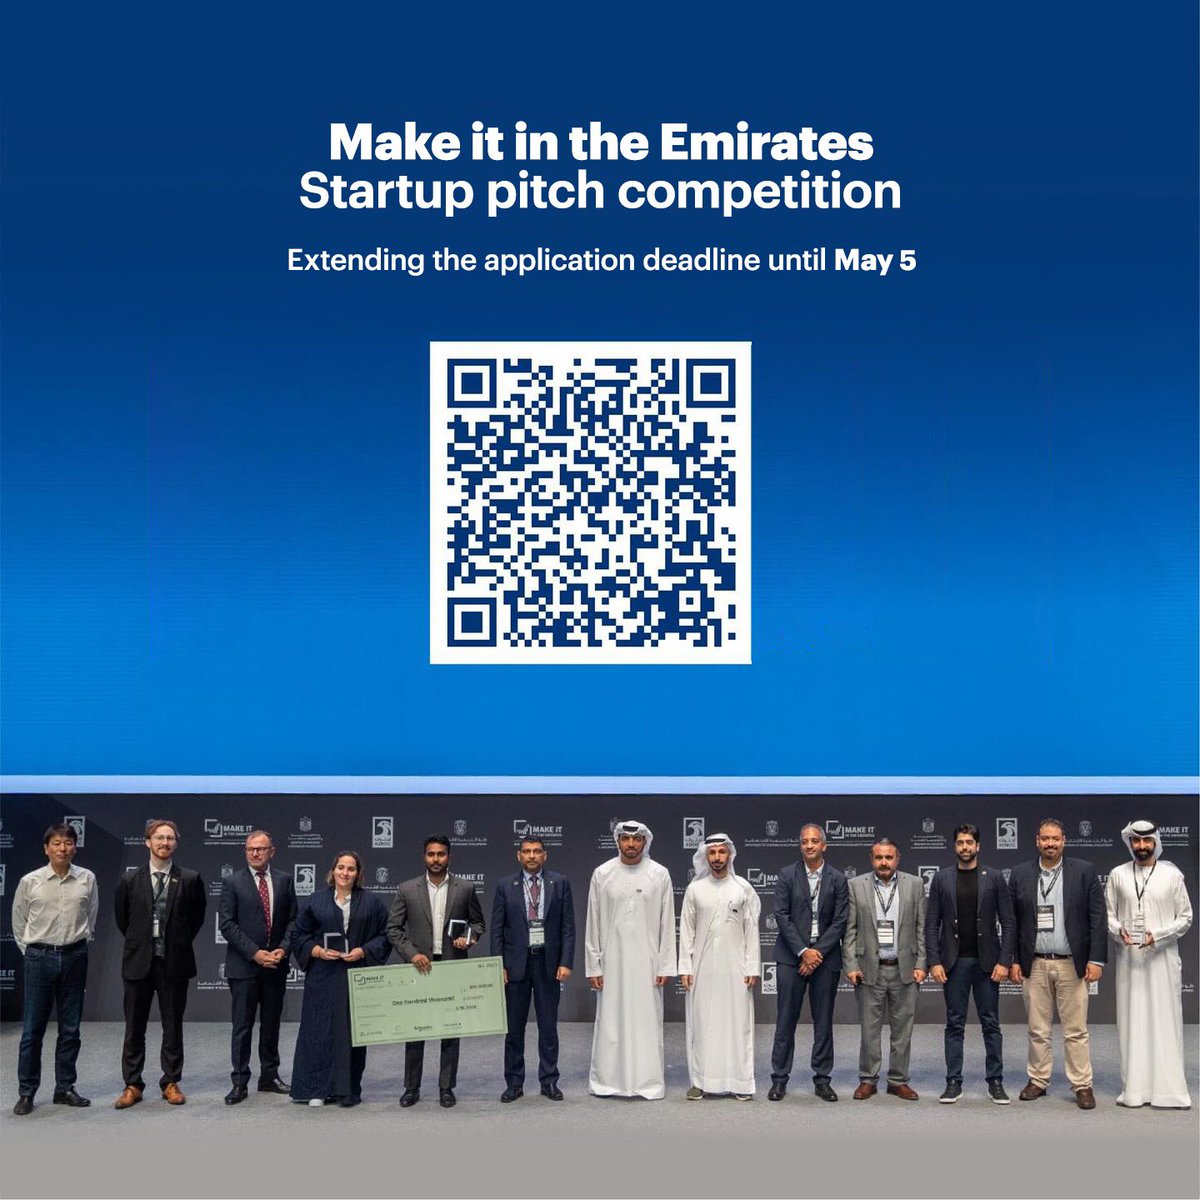 #MoIAT announces the extension of the submission period of the 2nd edition of the #MakeItInTheEmirates Startup Pitch Competition until May 5. MoIAT encourages all companies to complete the submission procedures for the competition via the link: form.typeform.com/to/RHHZTFyK